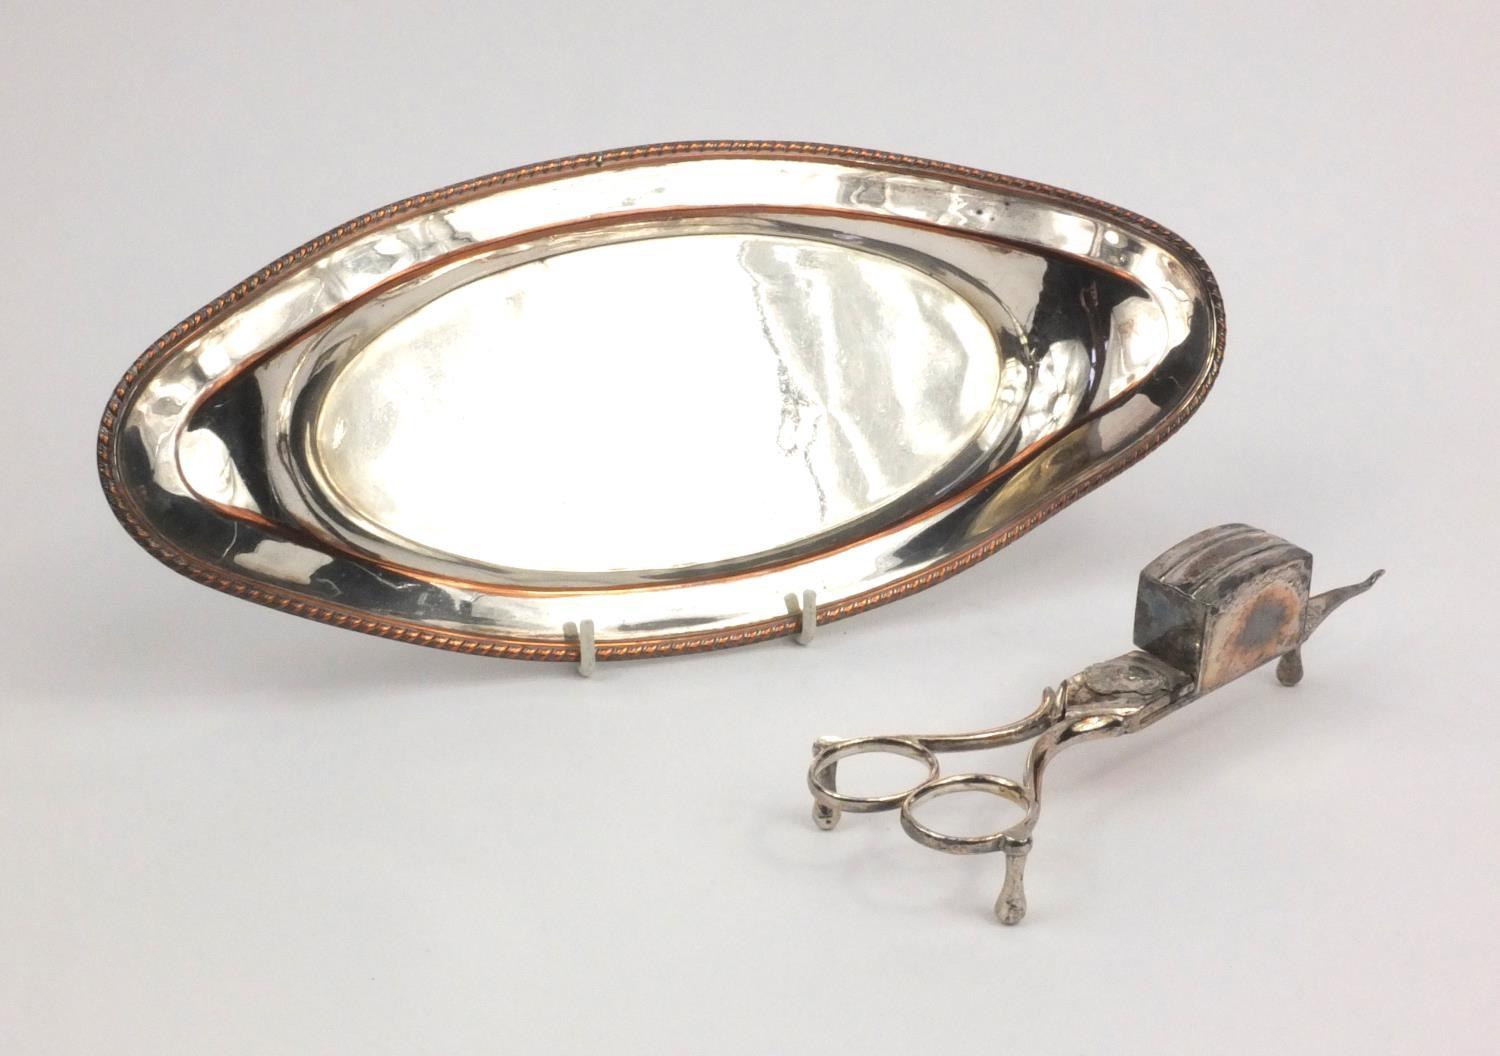 Victorian Sheffield plated candle snuffer on tray, 28cm diameter - Image 3 of 6